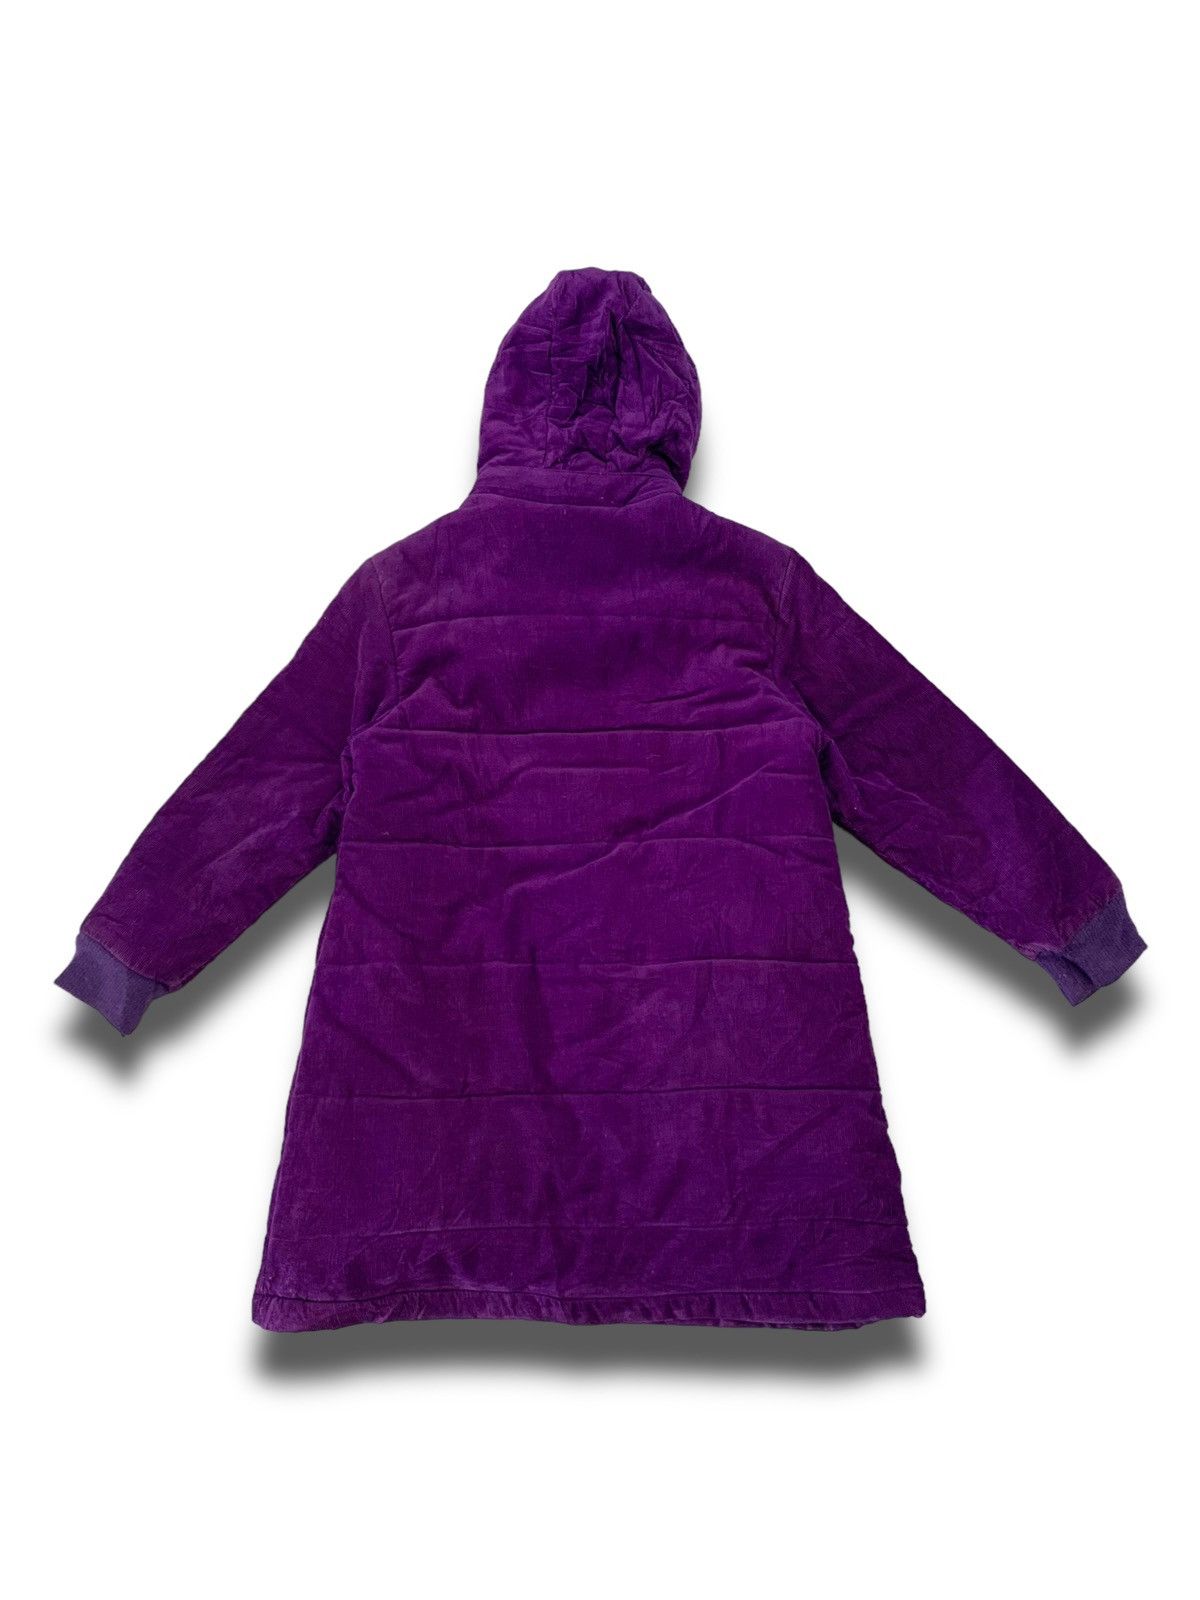 Archival Clothing Archival The Children’s Place Japanese Jacket Size L / US 10 / IT 46 - 7 Thumbnail